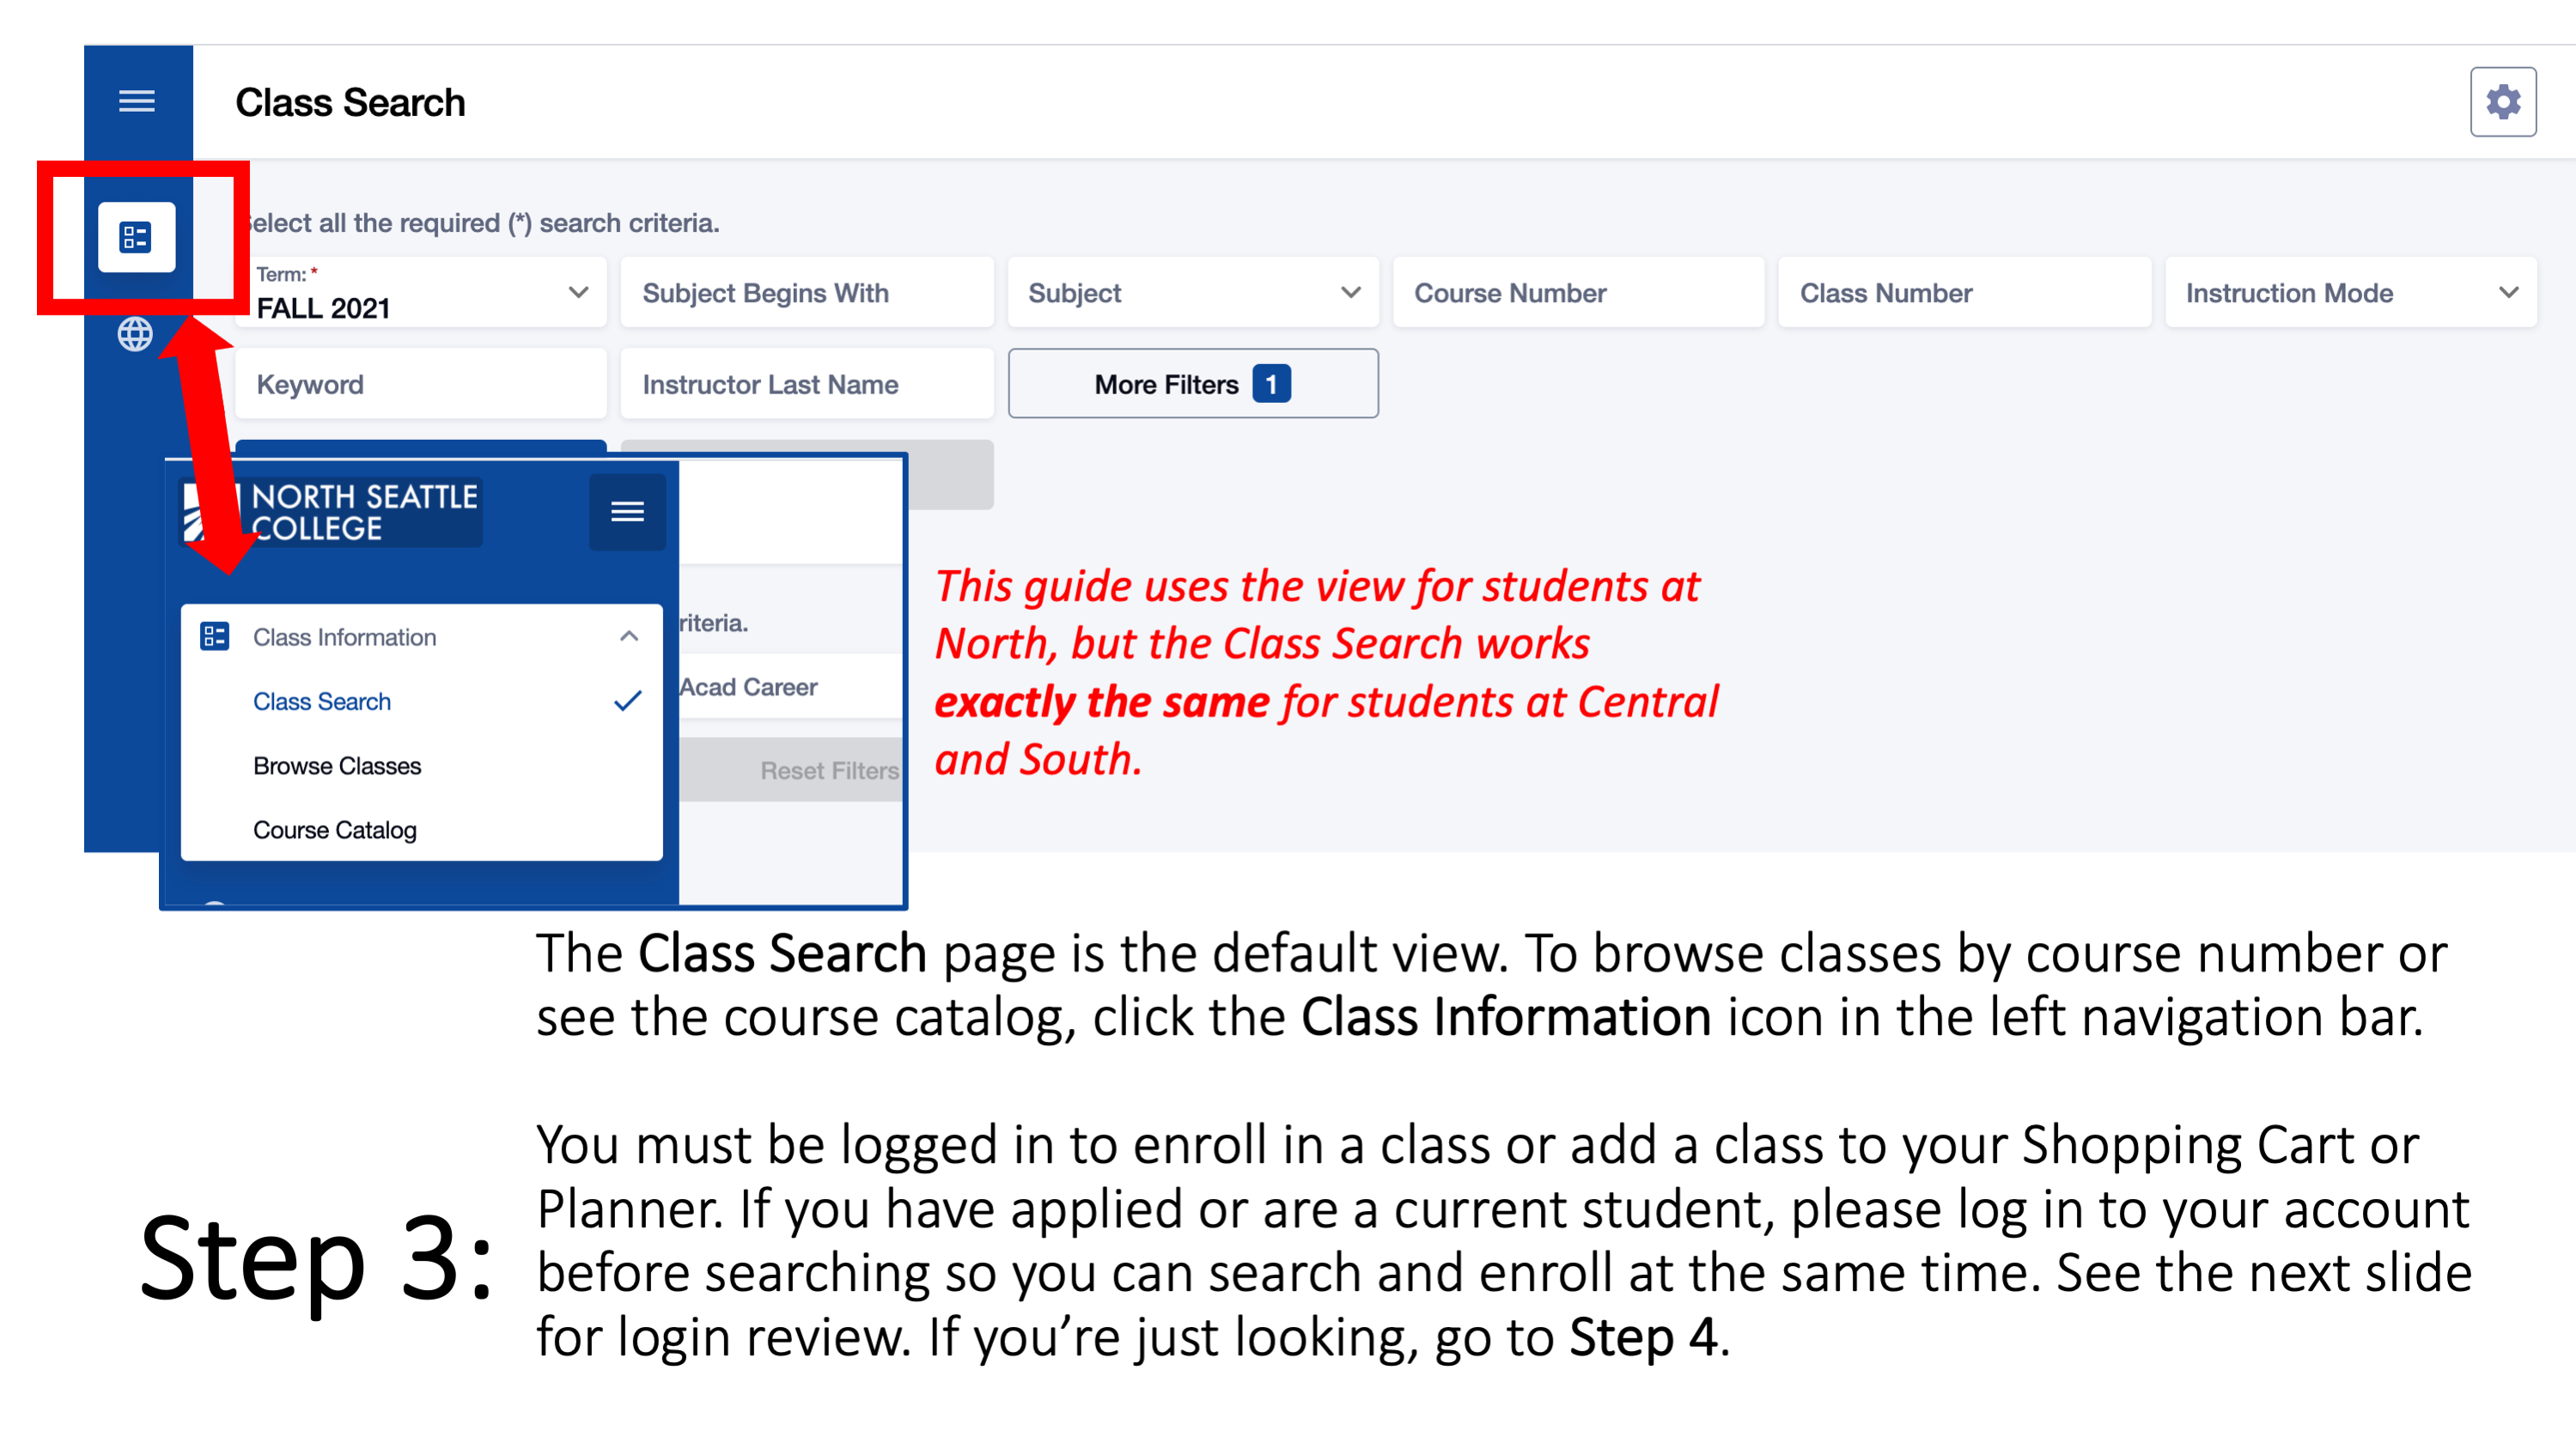 Step 3: The Class Search page is the default view. To browse classes by course number or see the course catalog, click the Class Information icon in the left navigation bar. You must be logged in to enroll in a class or add a class to your Shopping Cart or Planner. If you have applied or are a current student, please log in to your account before searching so you can search and enroll at the same time. See the next slide for login review.